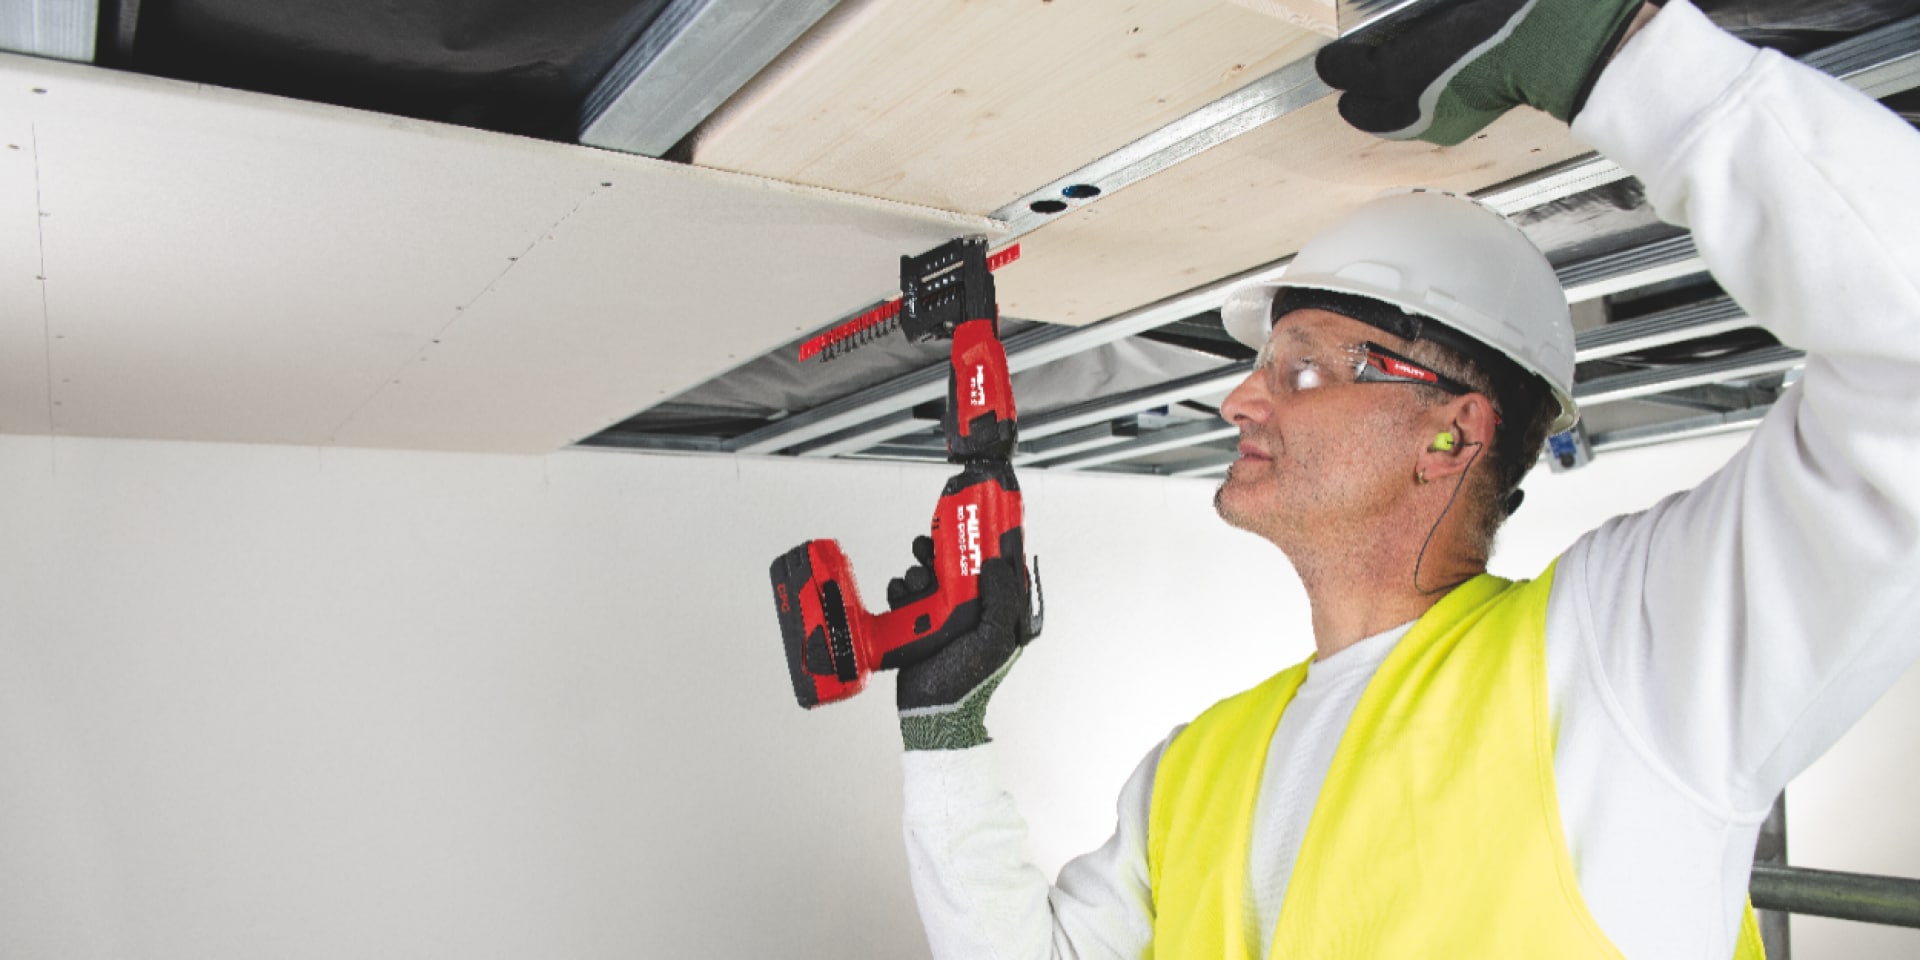 Image of drywall being installed overhead using collated screws, a screw magazine and the new SD 5000-A22 cordless drywall screwdriver